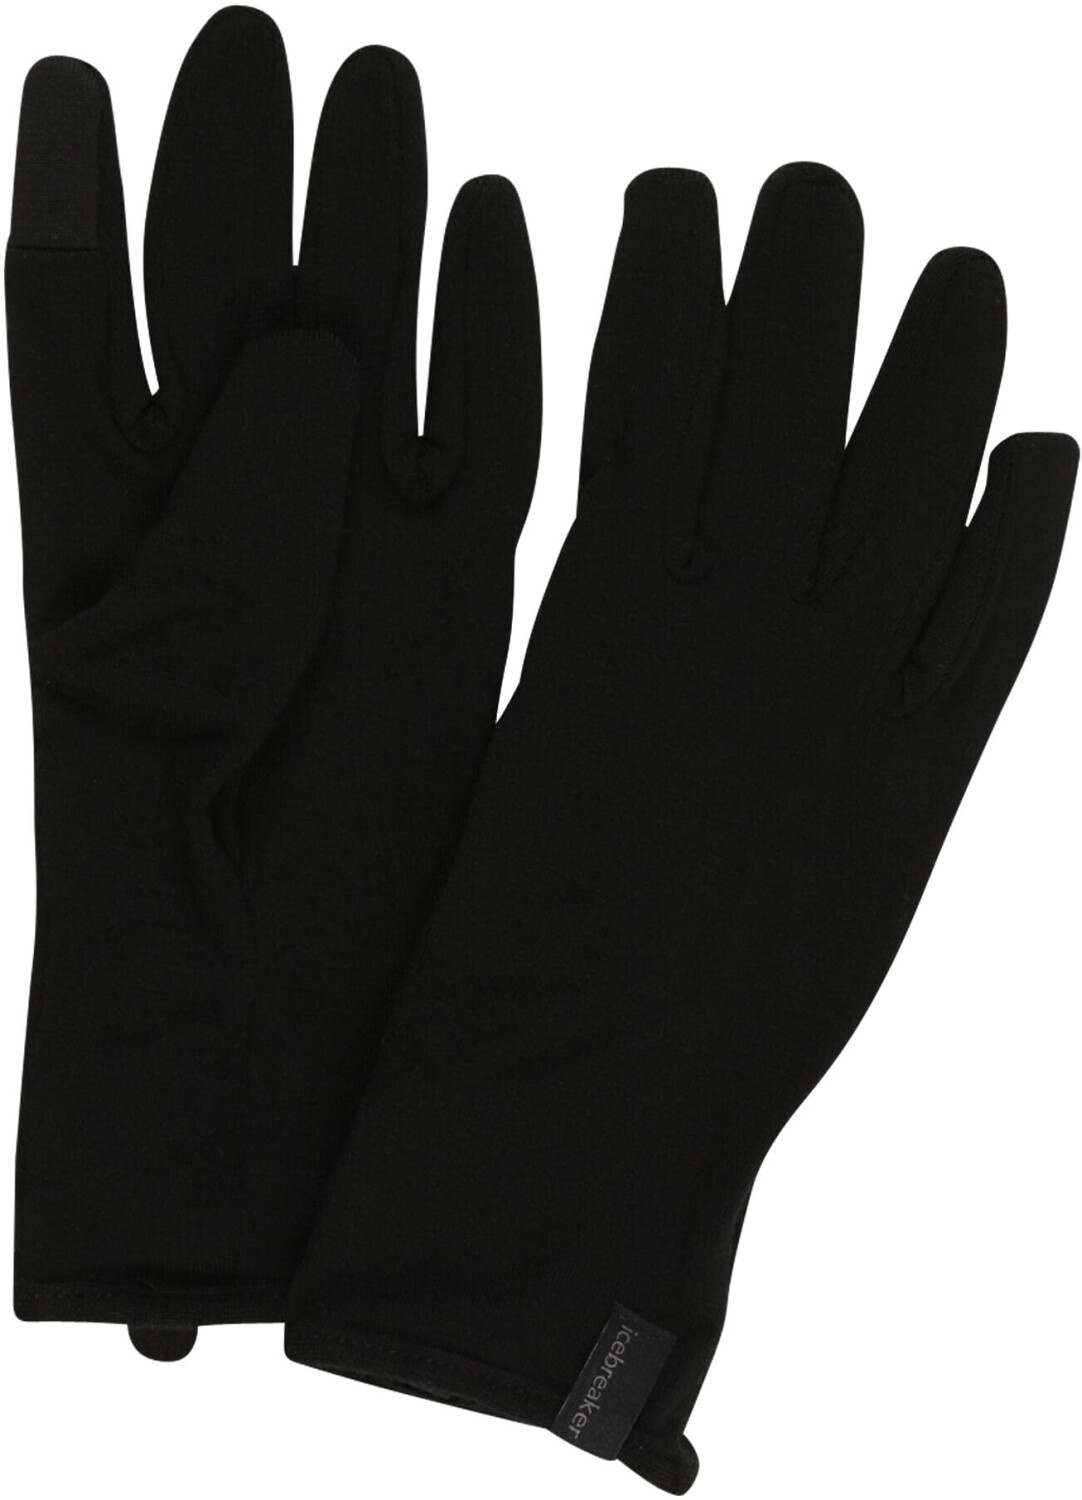 Buy Icebreaker Adult 260 Tech Glove liner black from £21.99 (Today